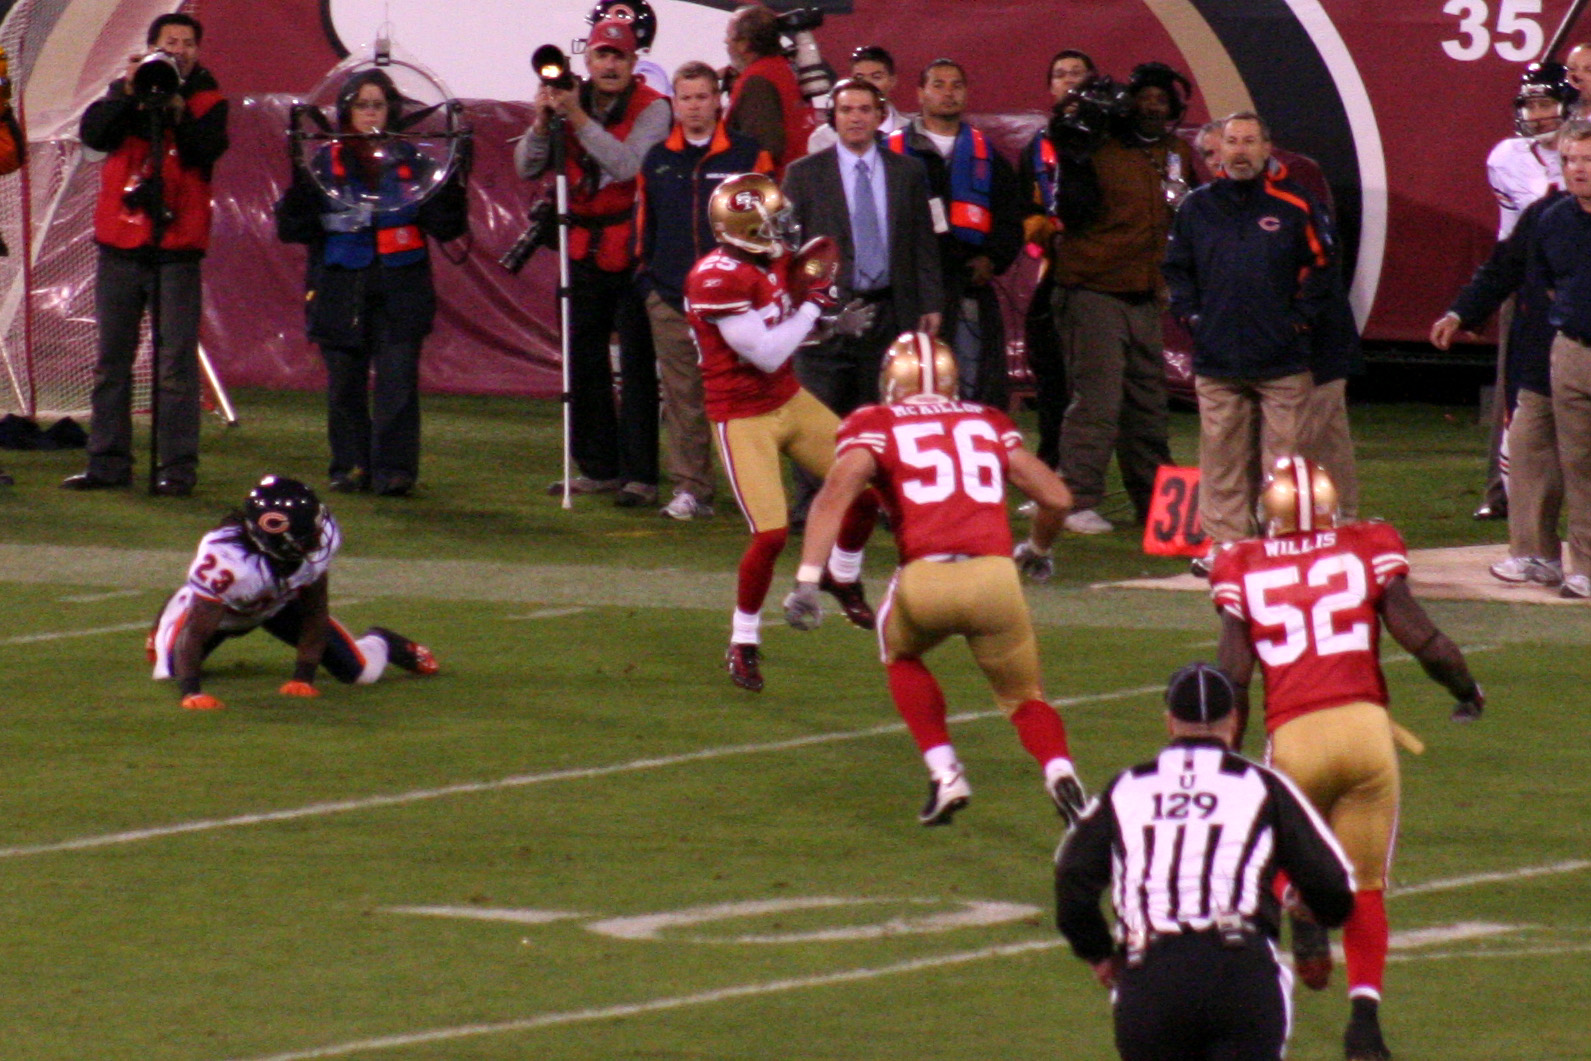 players are running while standing on the field during a game